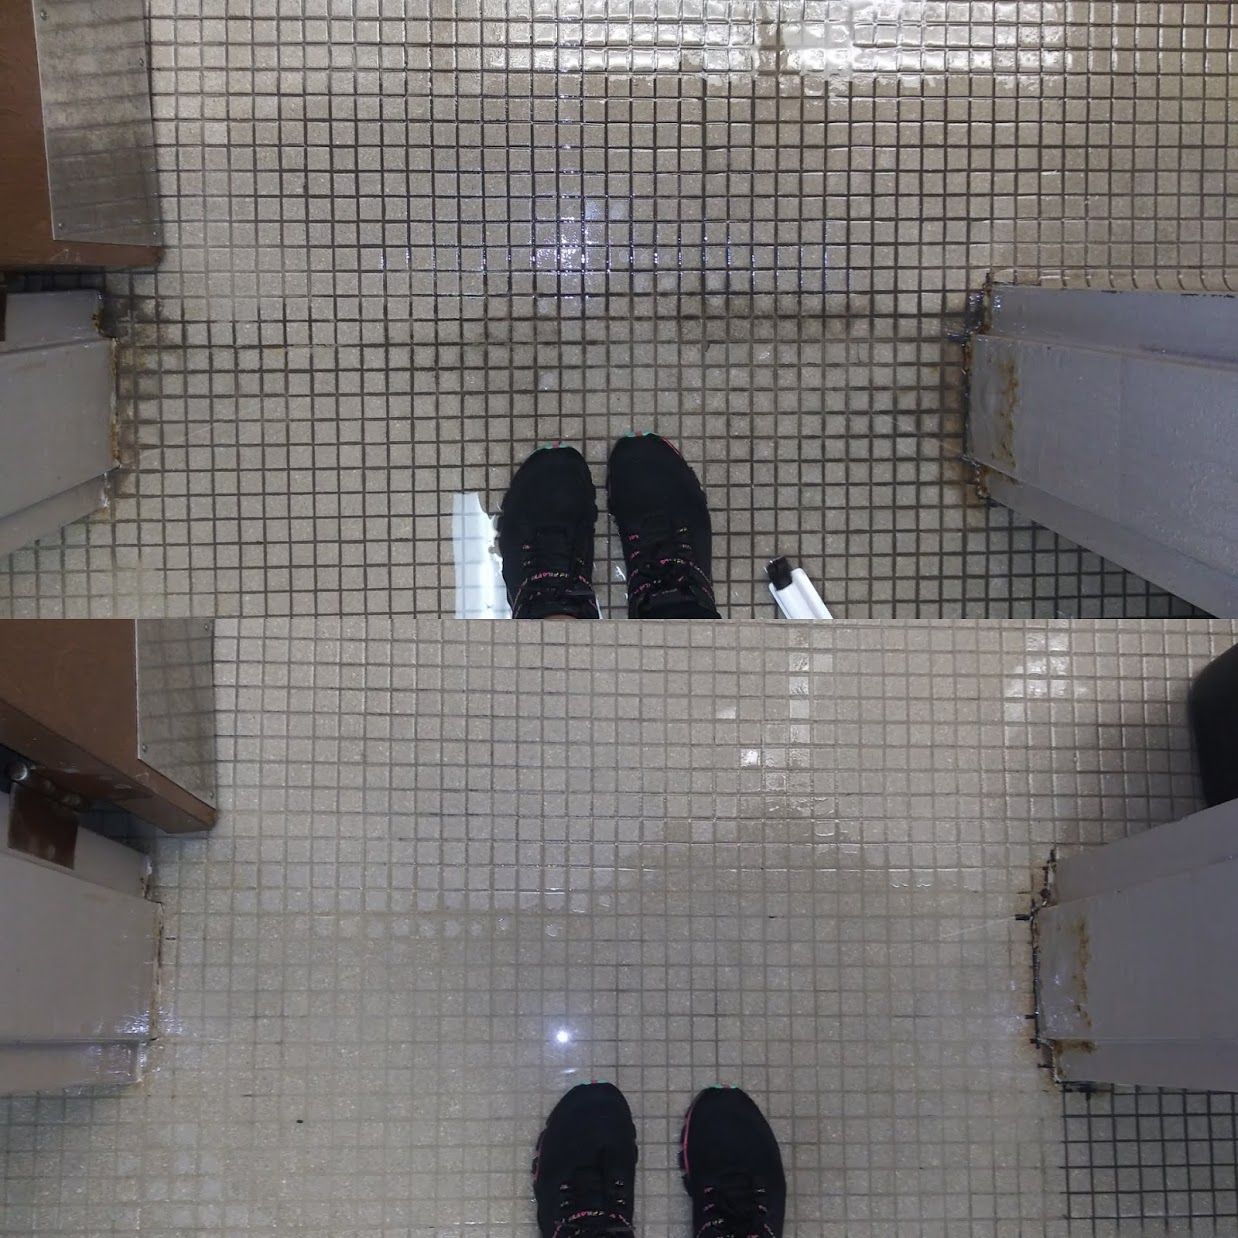 a pair of black shoes standing on a tiled floor